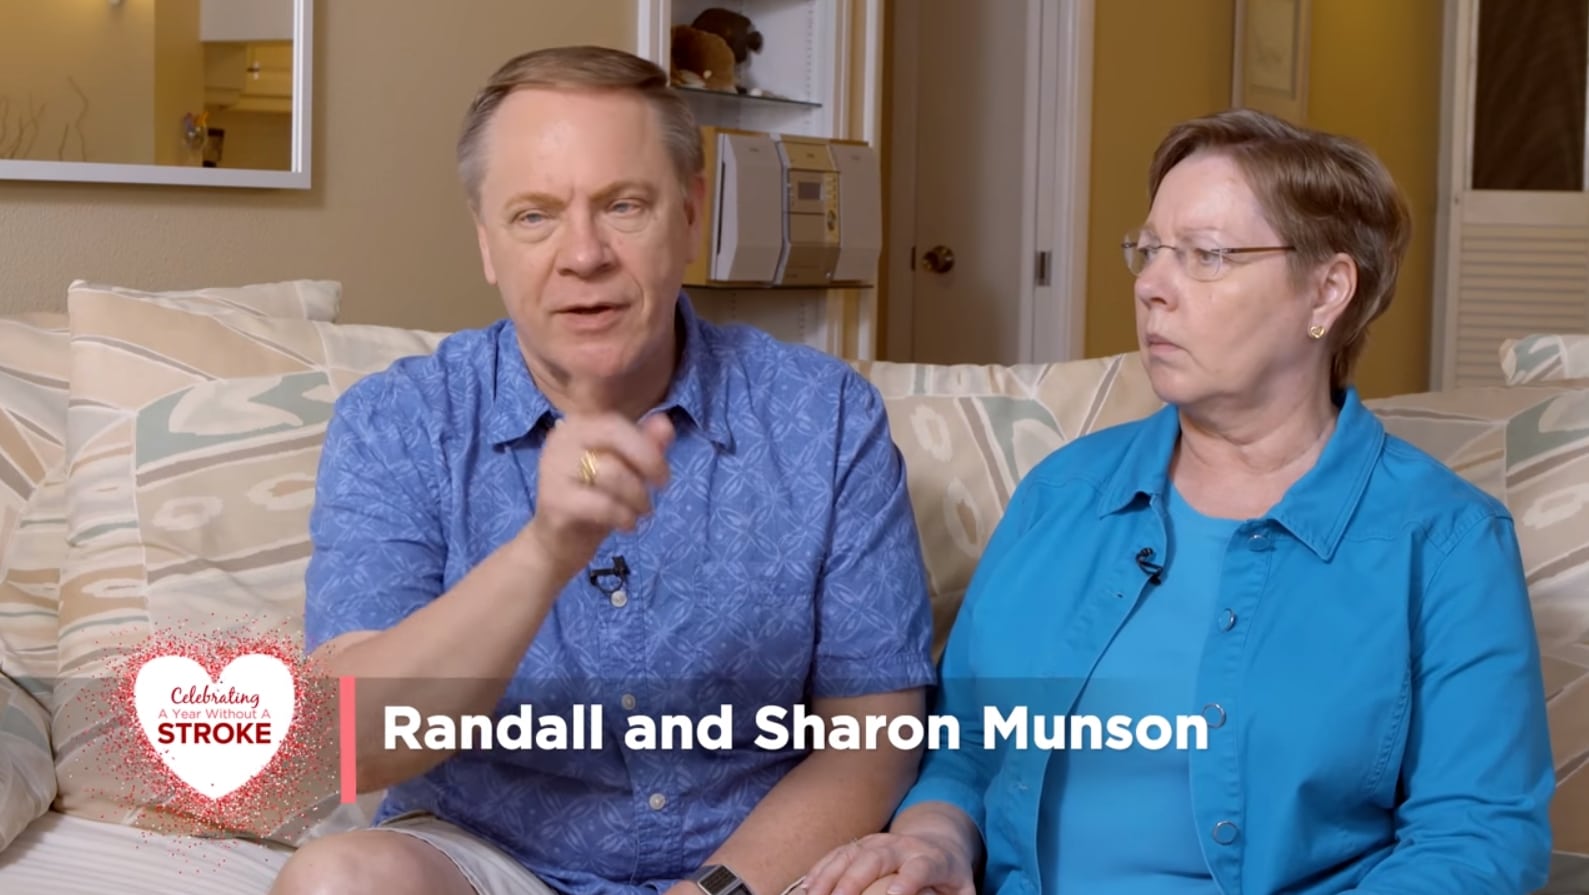 Randall and Sharon Munson sitting on a couch.